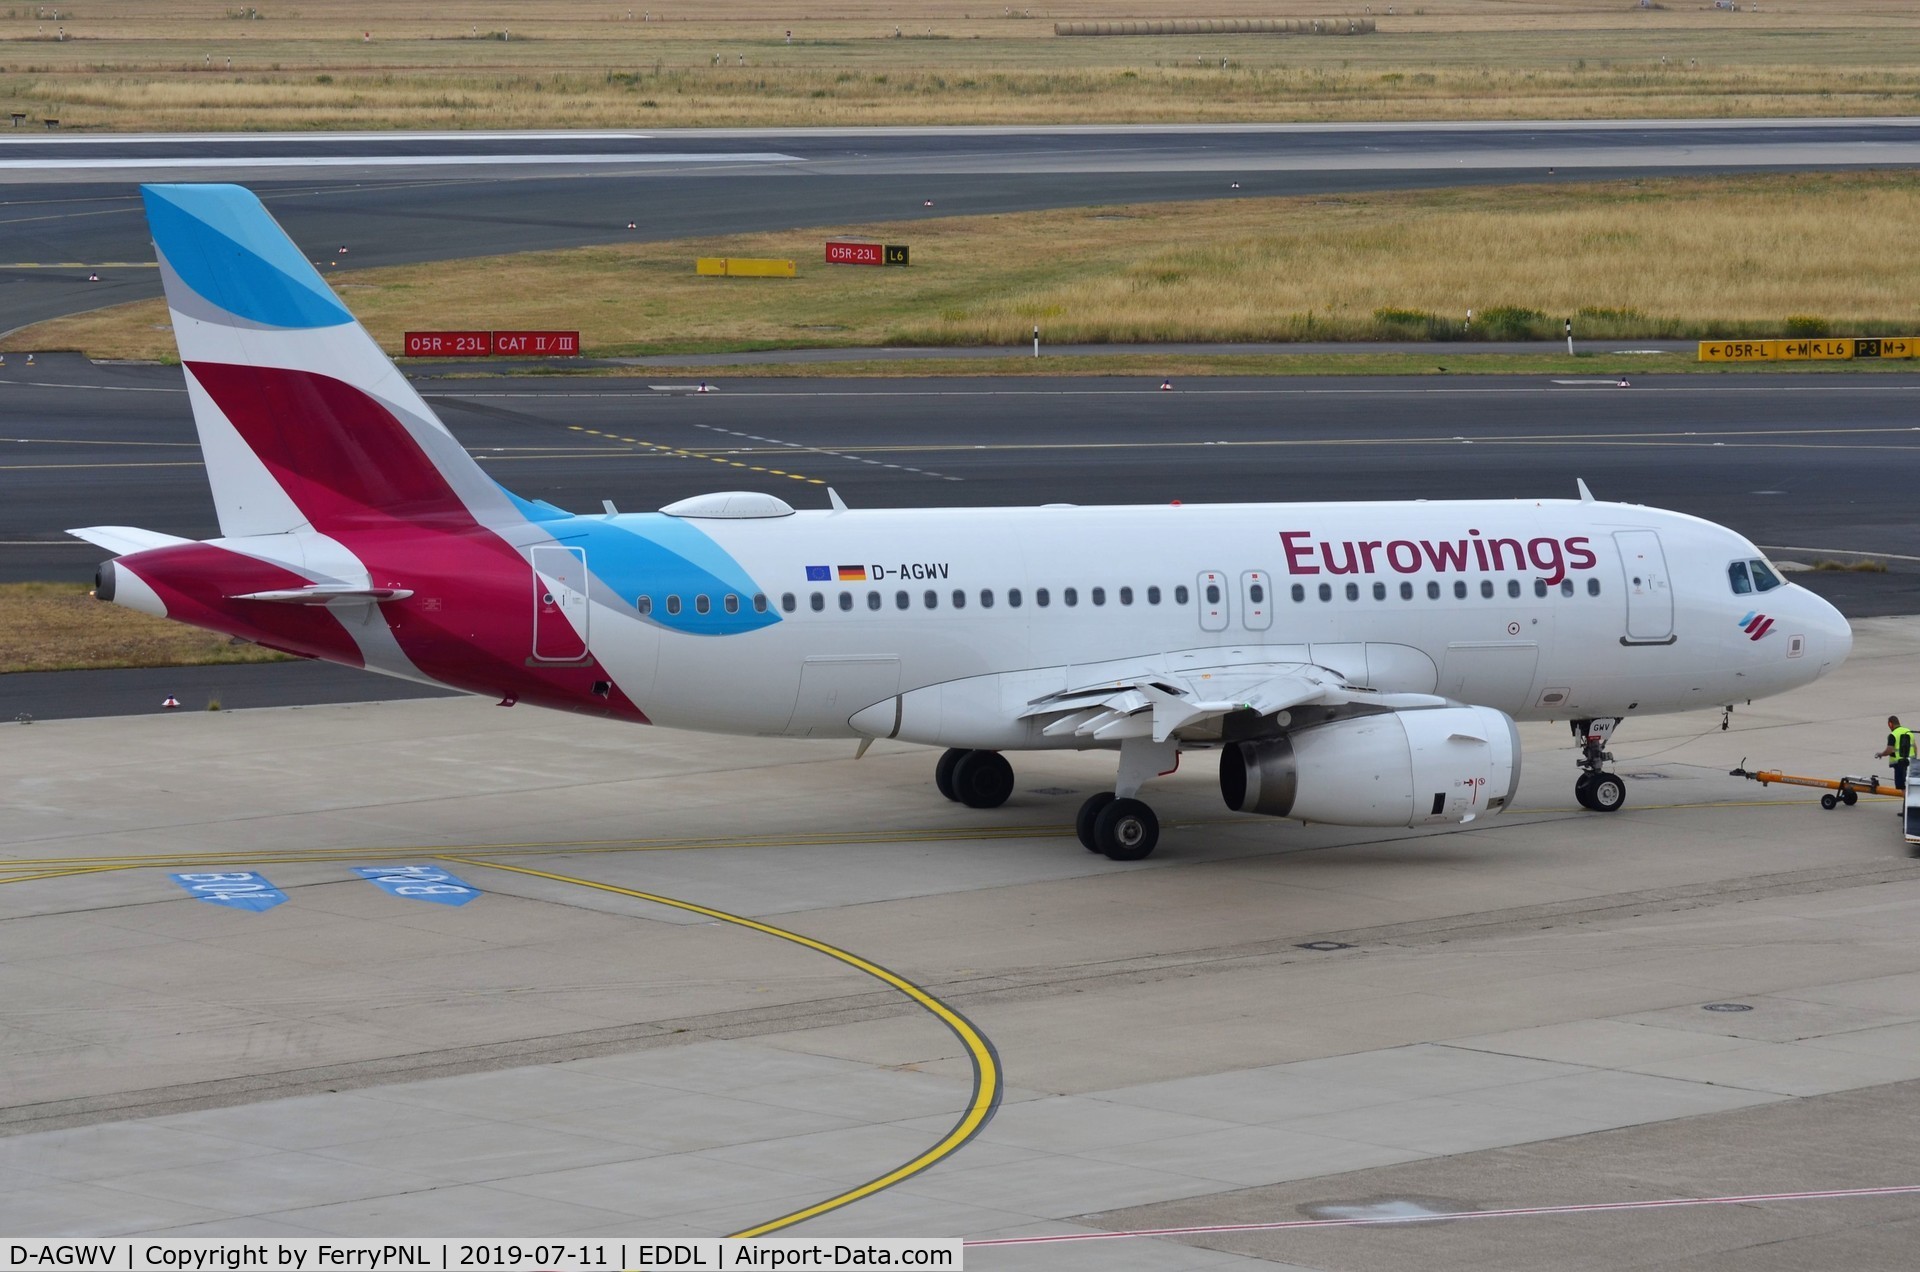 D-AGWV, 2013 Airbus A319-132 C/N 5467, Eurowings A319 pushed-back.